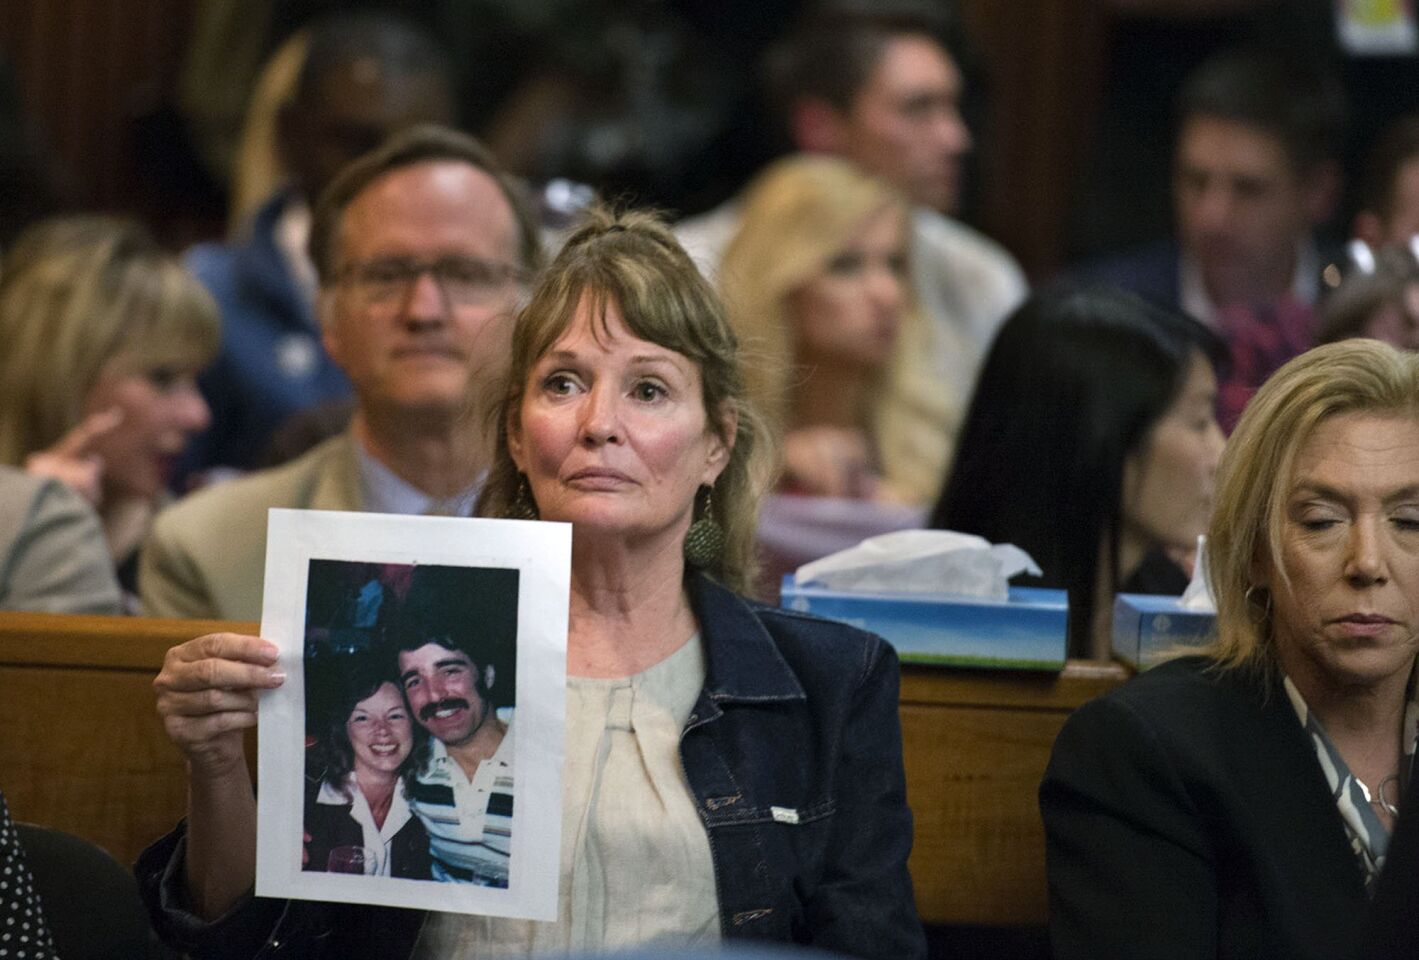 A woman holds up a photo of a couple in court.